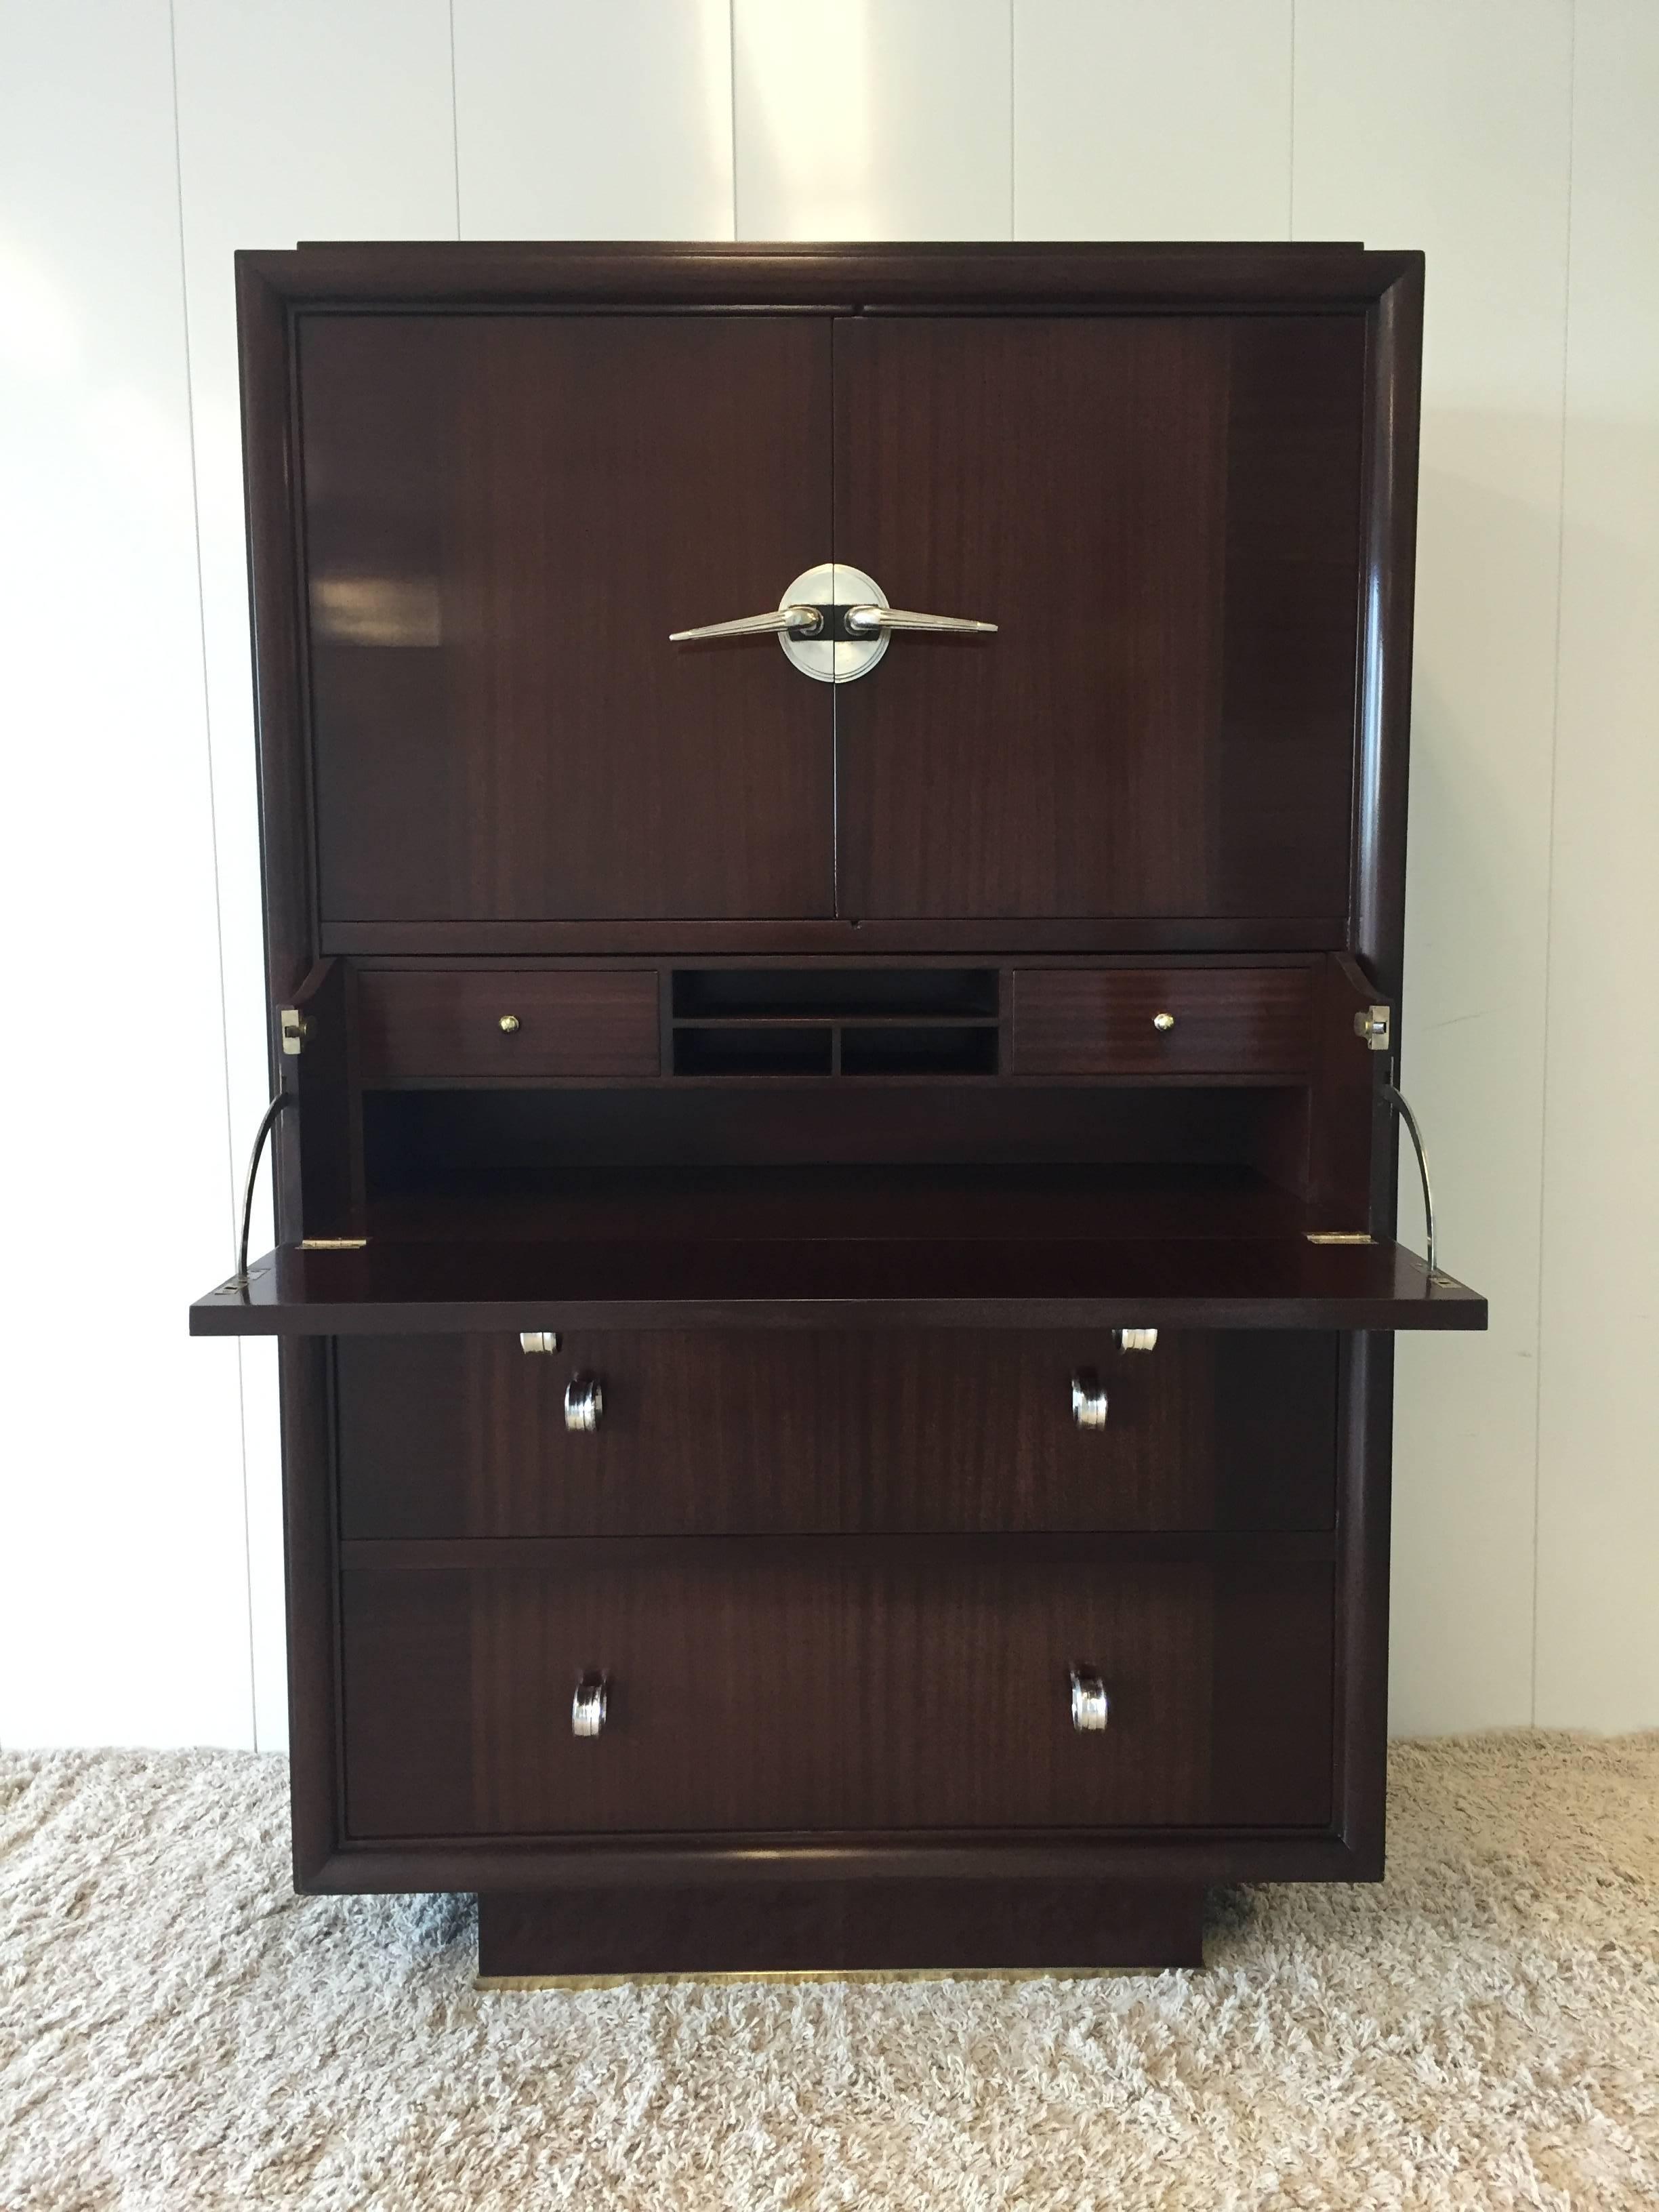 In the style of Donald Deskey, Art Deco skyscraper design, cabinet/secretary desk, with draw compartments and desk, book shelf compartment. Functional dark mahogany wood, with nickel silver pulls and hardware, black tarnished trim. Stamped and